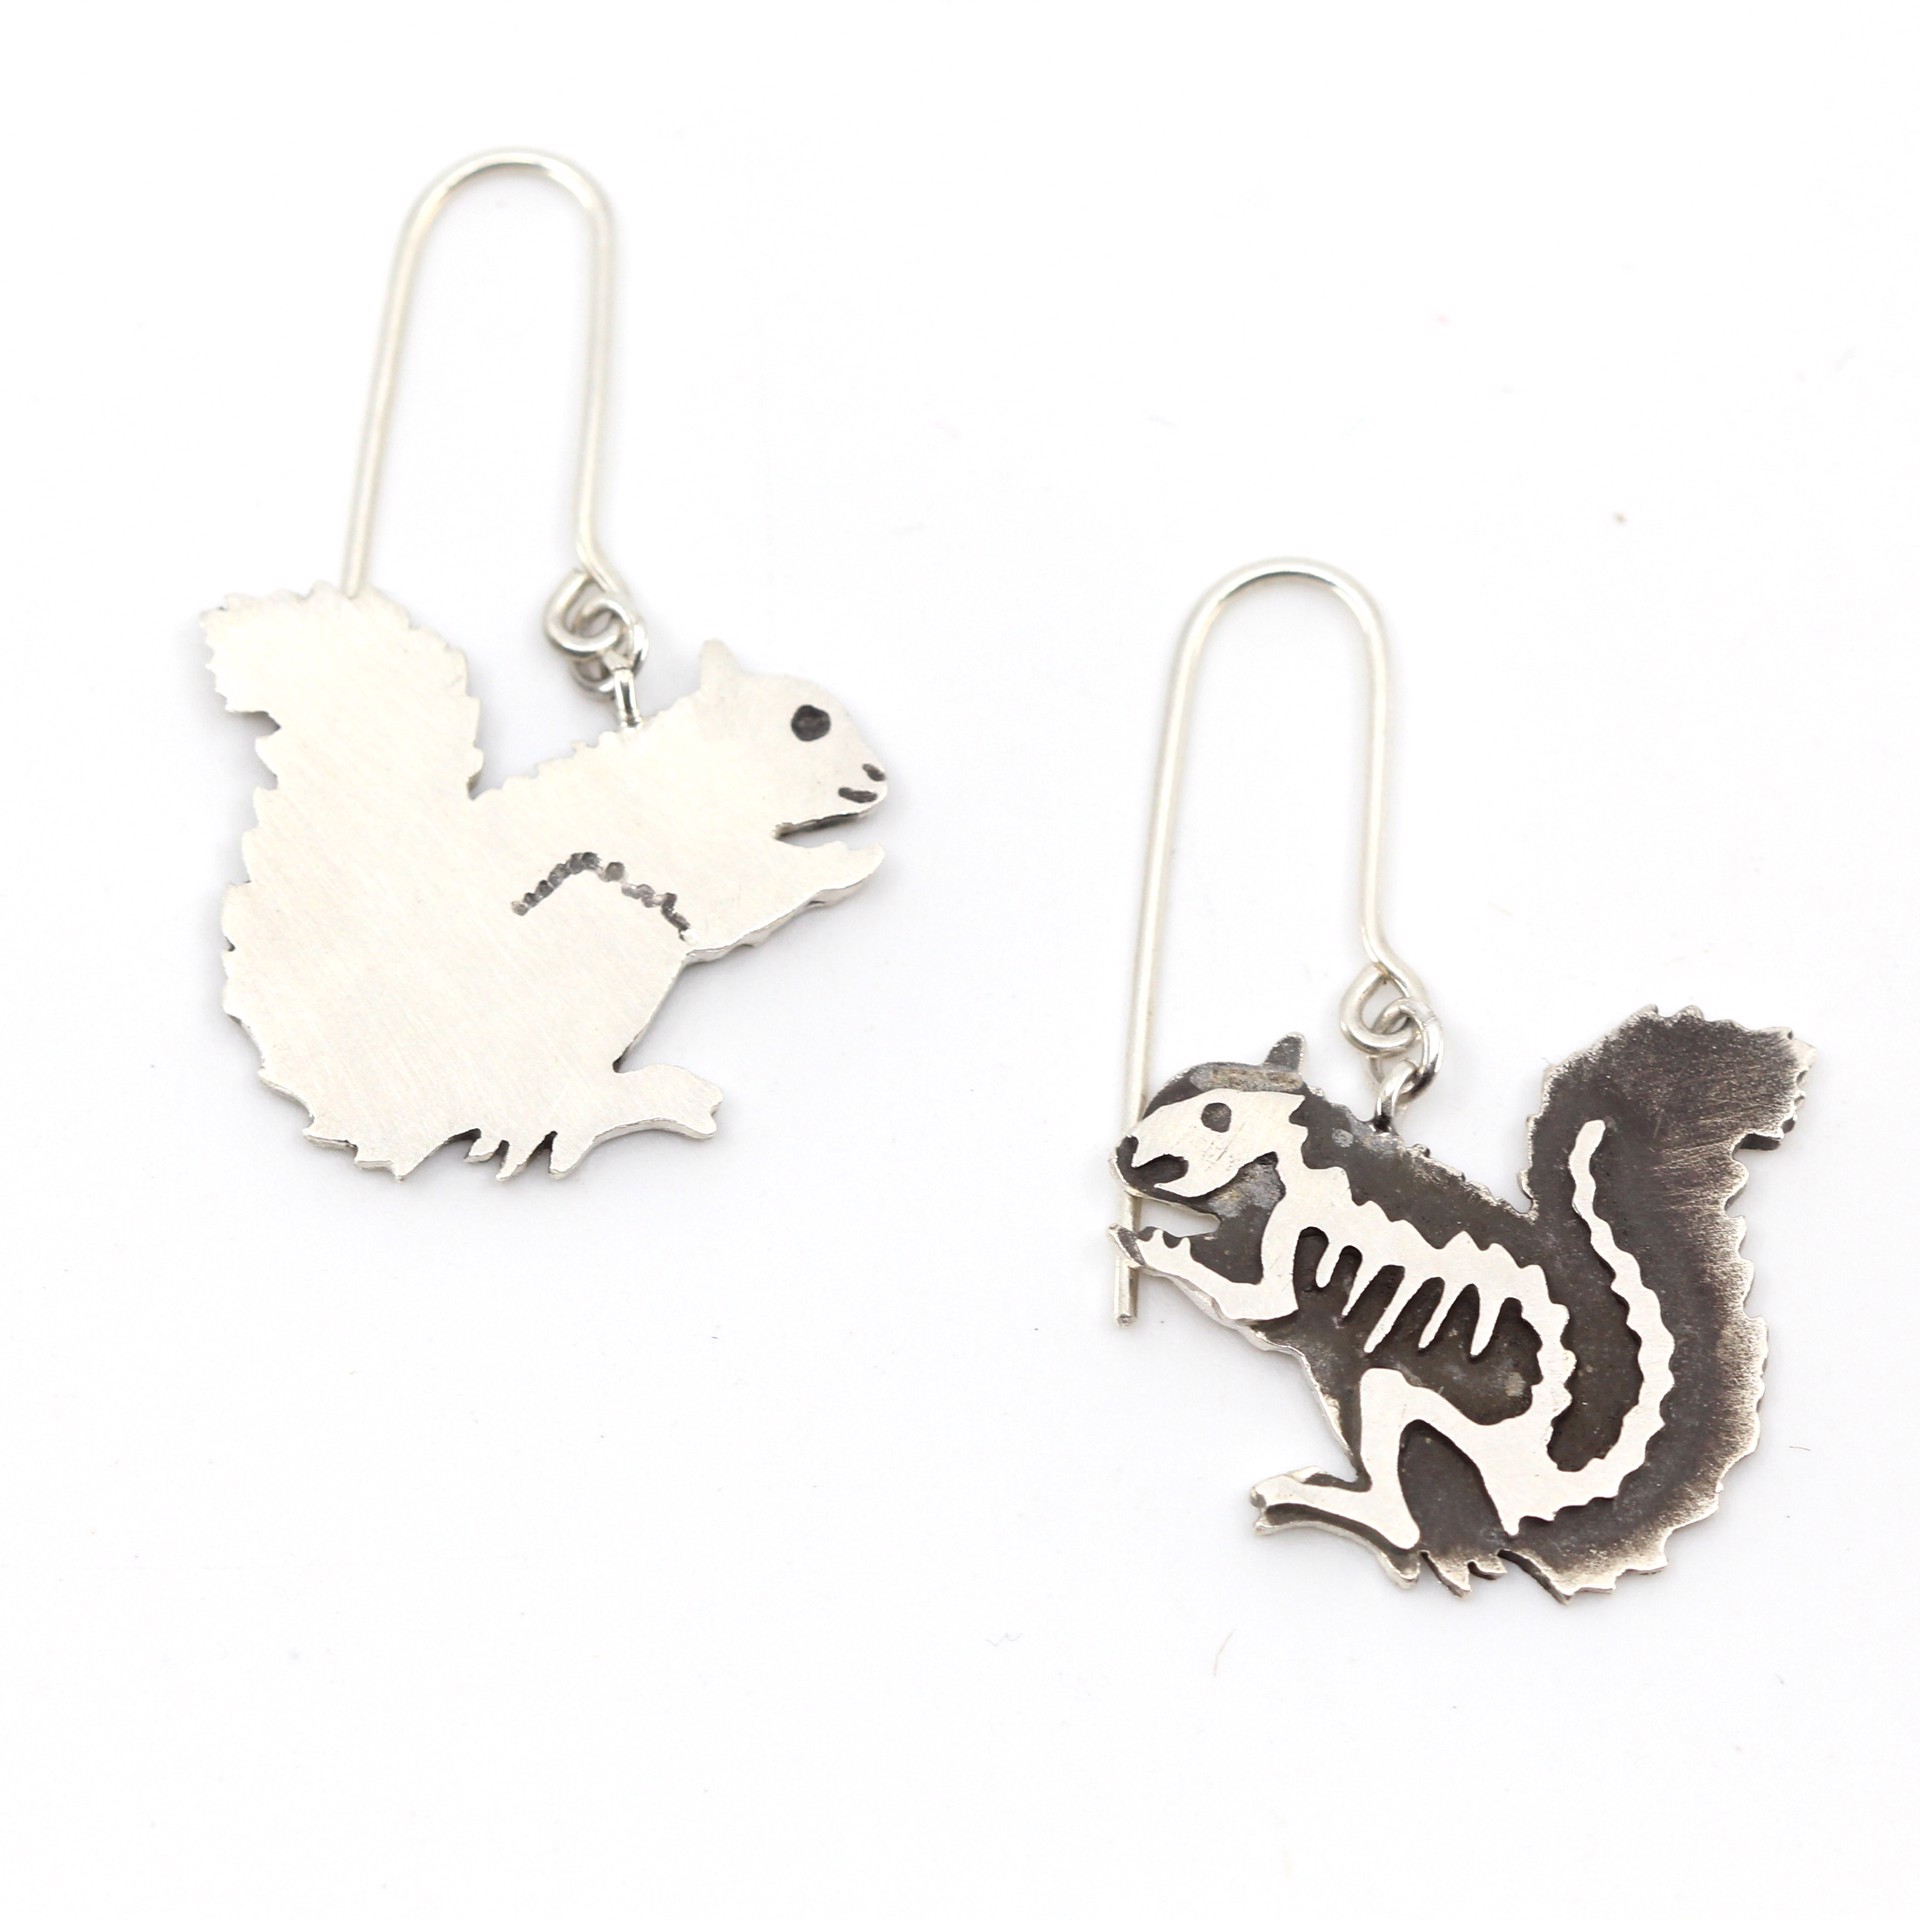 Double-Sided Squirrel Earrings by Susan Elnora